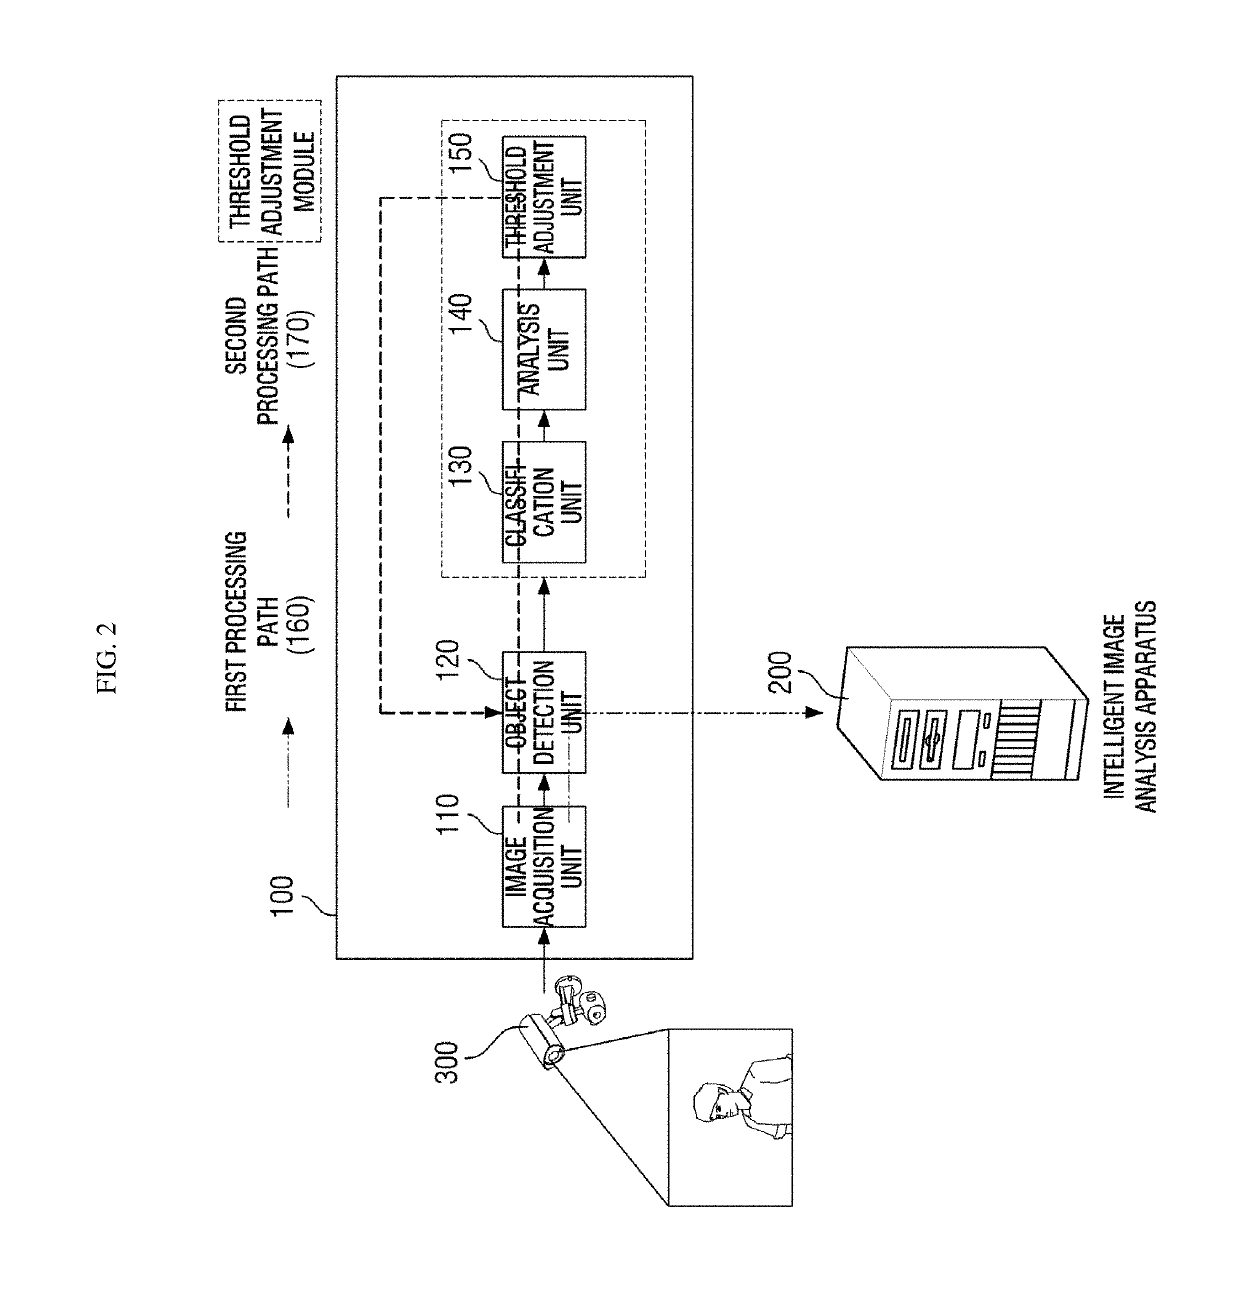 Machine learning-based object detection method and apparatus